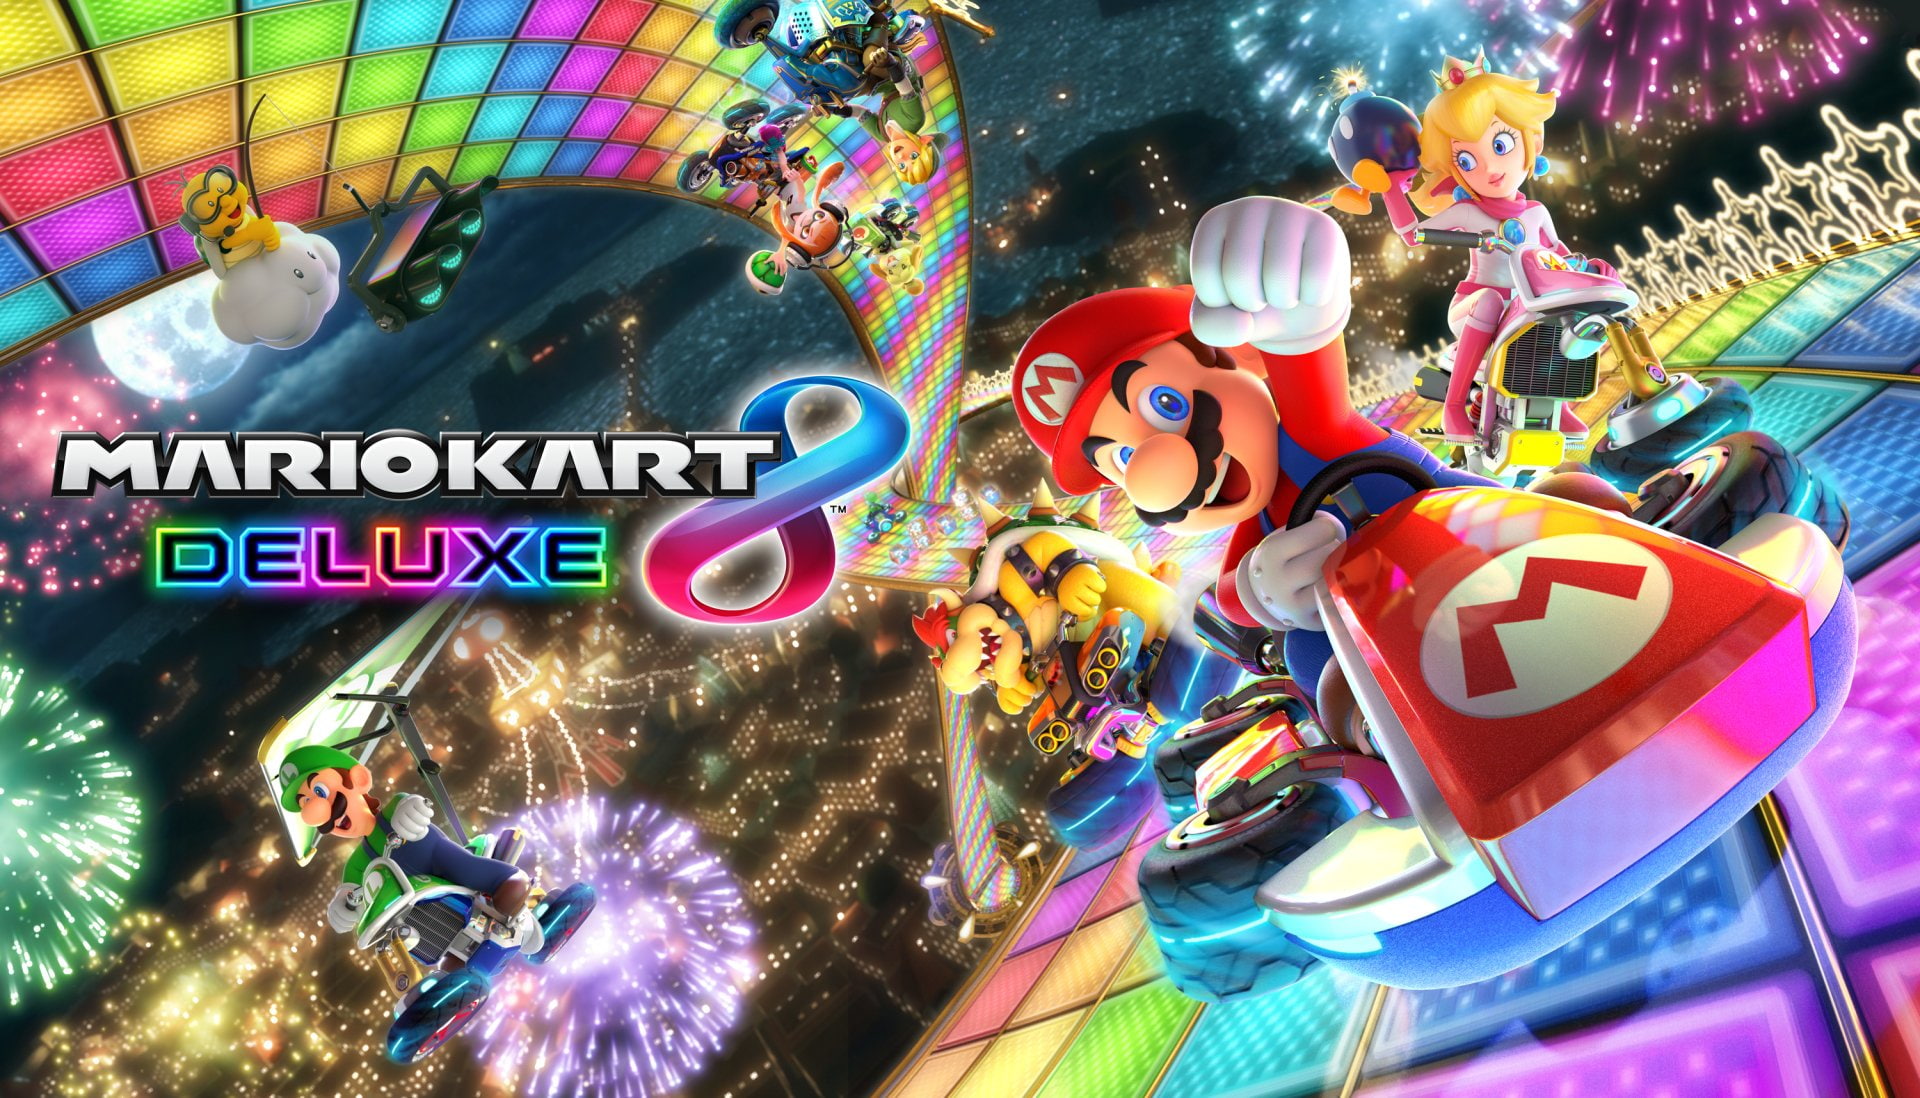 Mario Kart 8 Deluxe Review: Racing to Victory on the Nintendo Switch